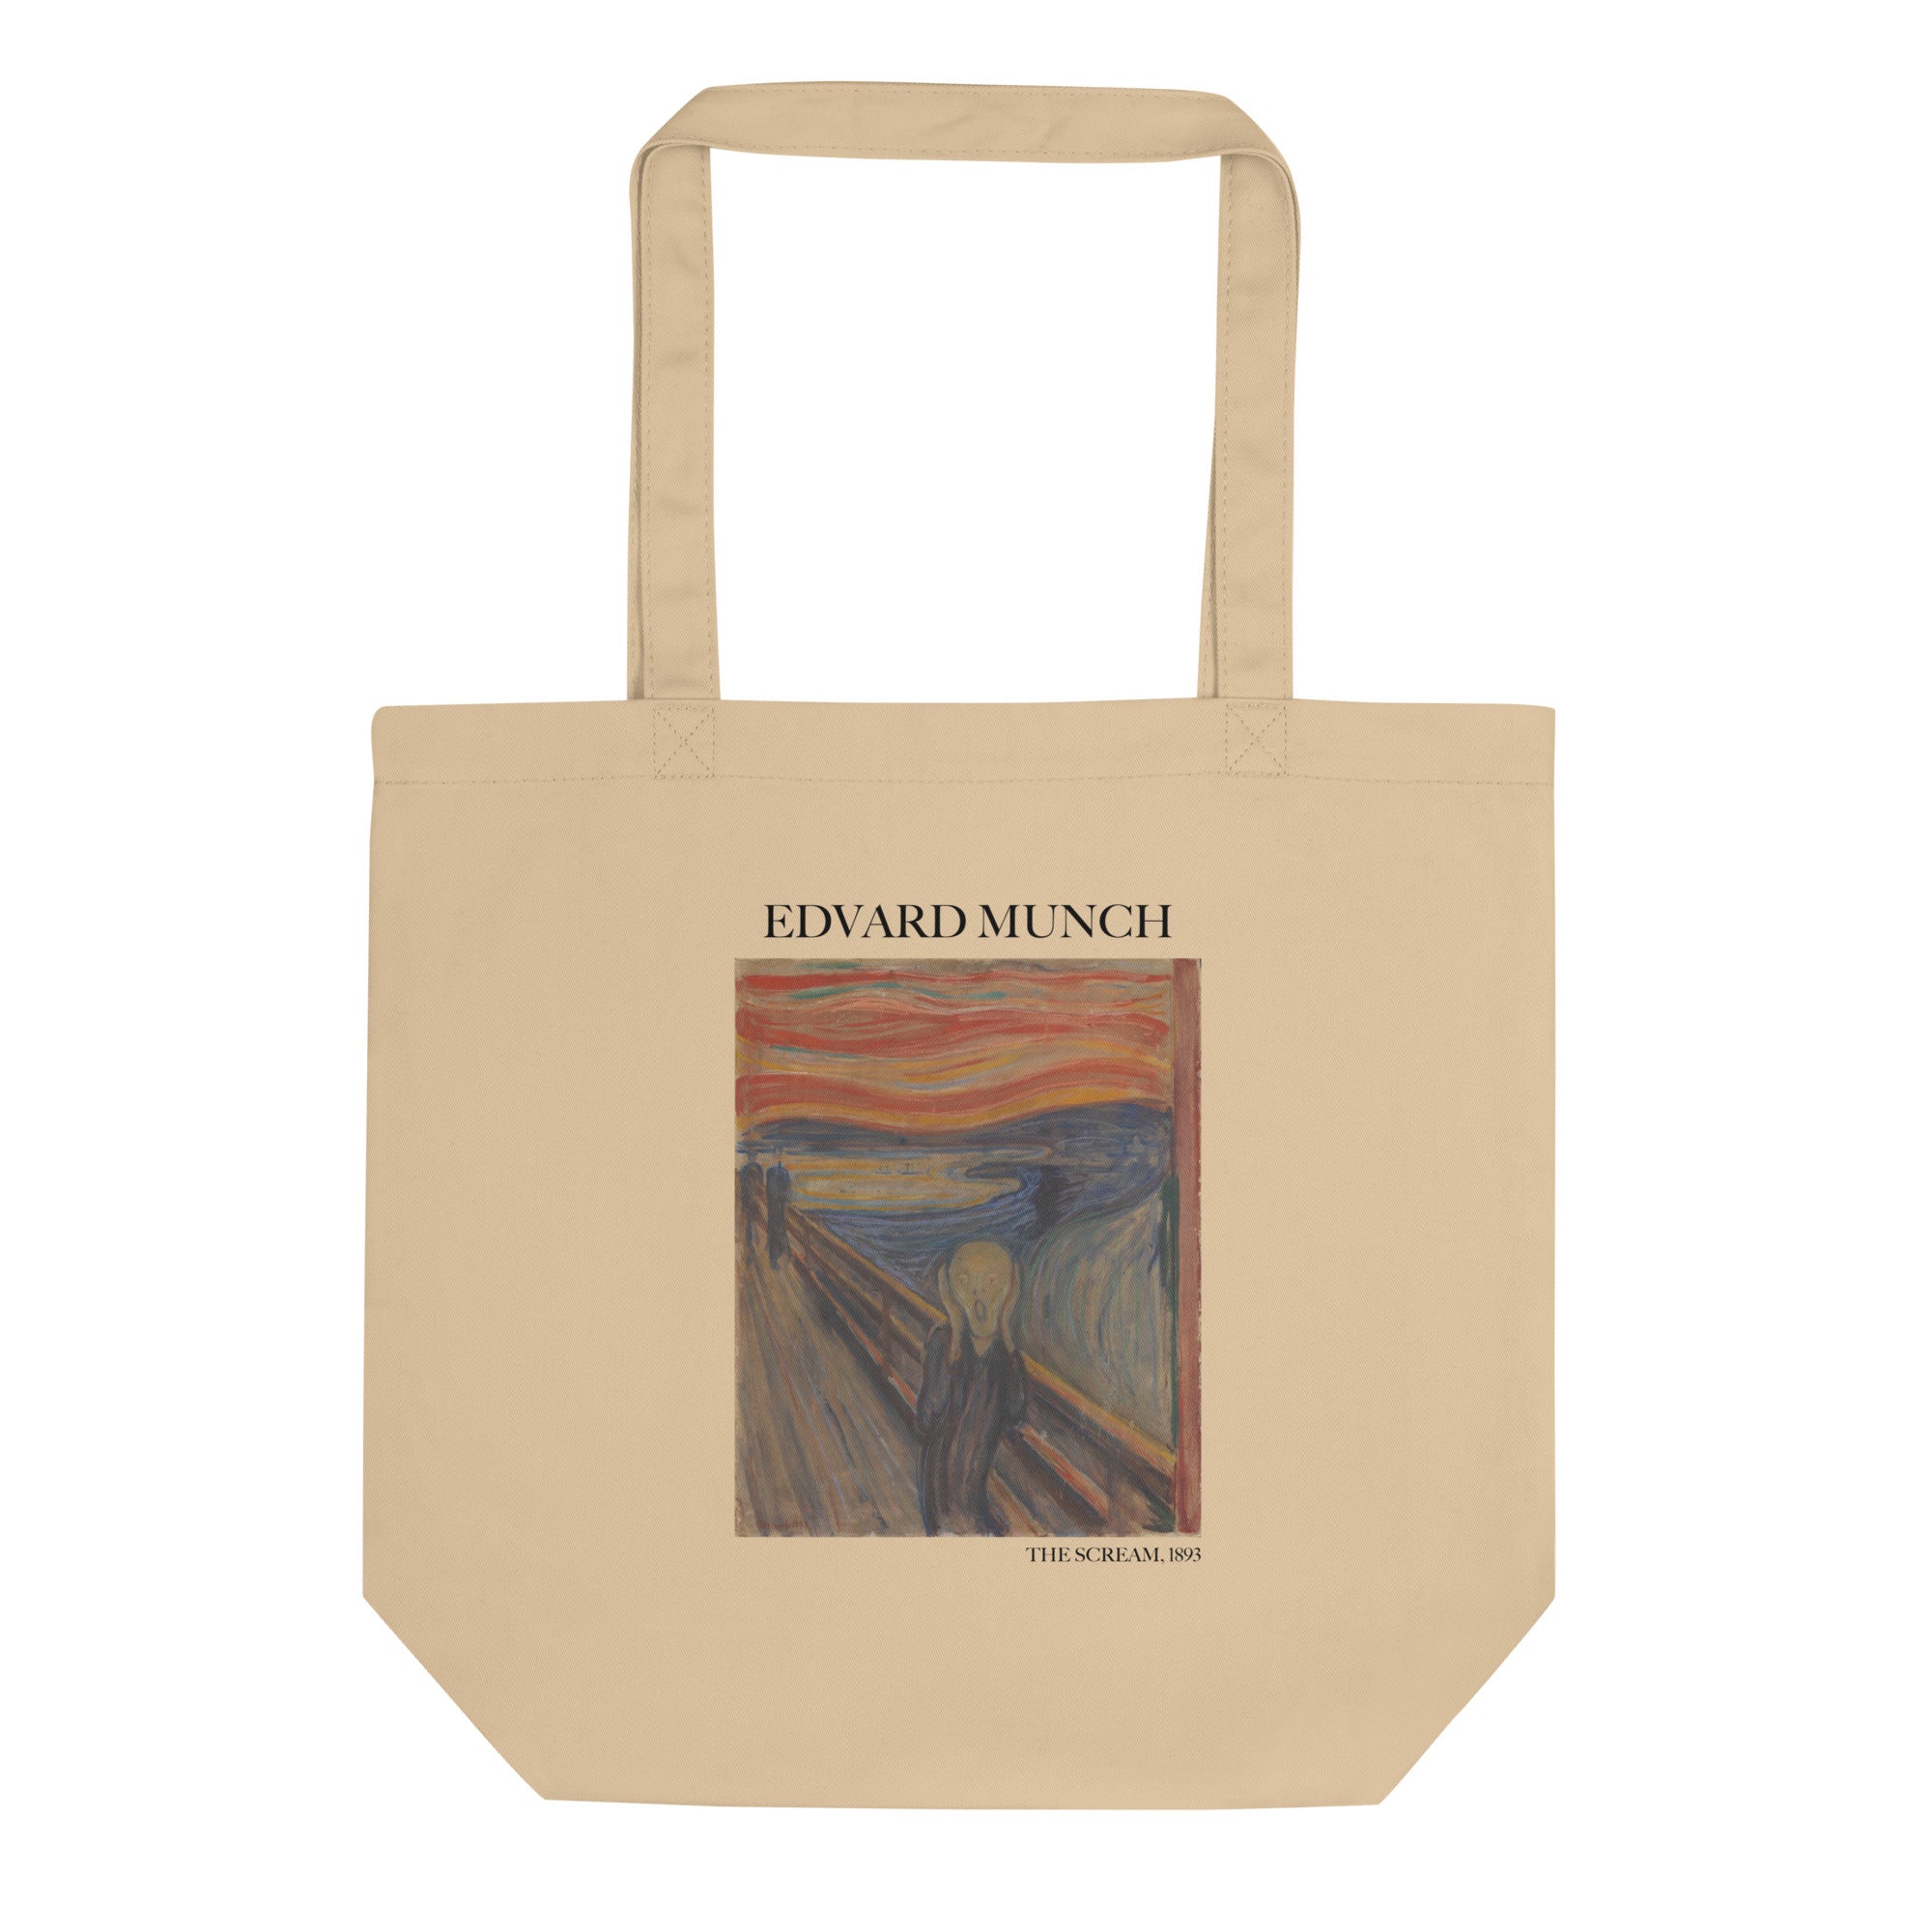 Edvard Munch 'The Scream' Famous Painting Totebag | Eco Friendly Art Tote Bag